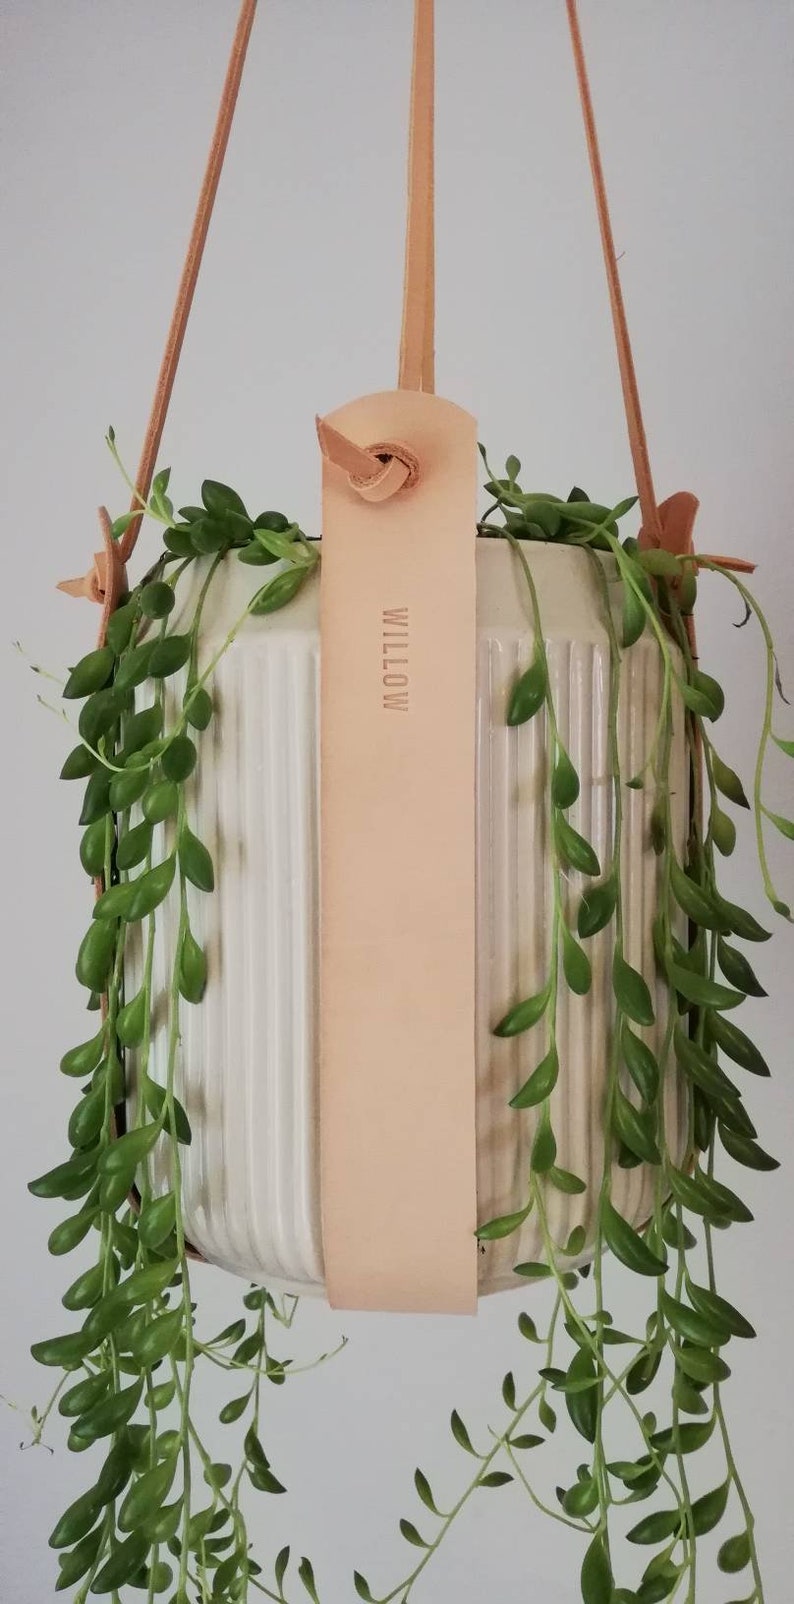 Small leather hanging planter / Indoor hanging planter / Indoor hanging basket / Minimalist hygge decor / Plant holder image 2